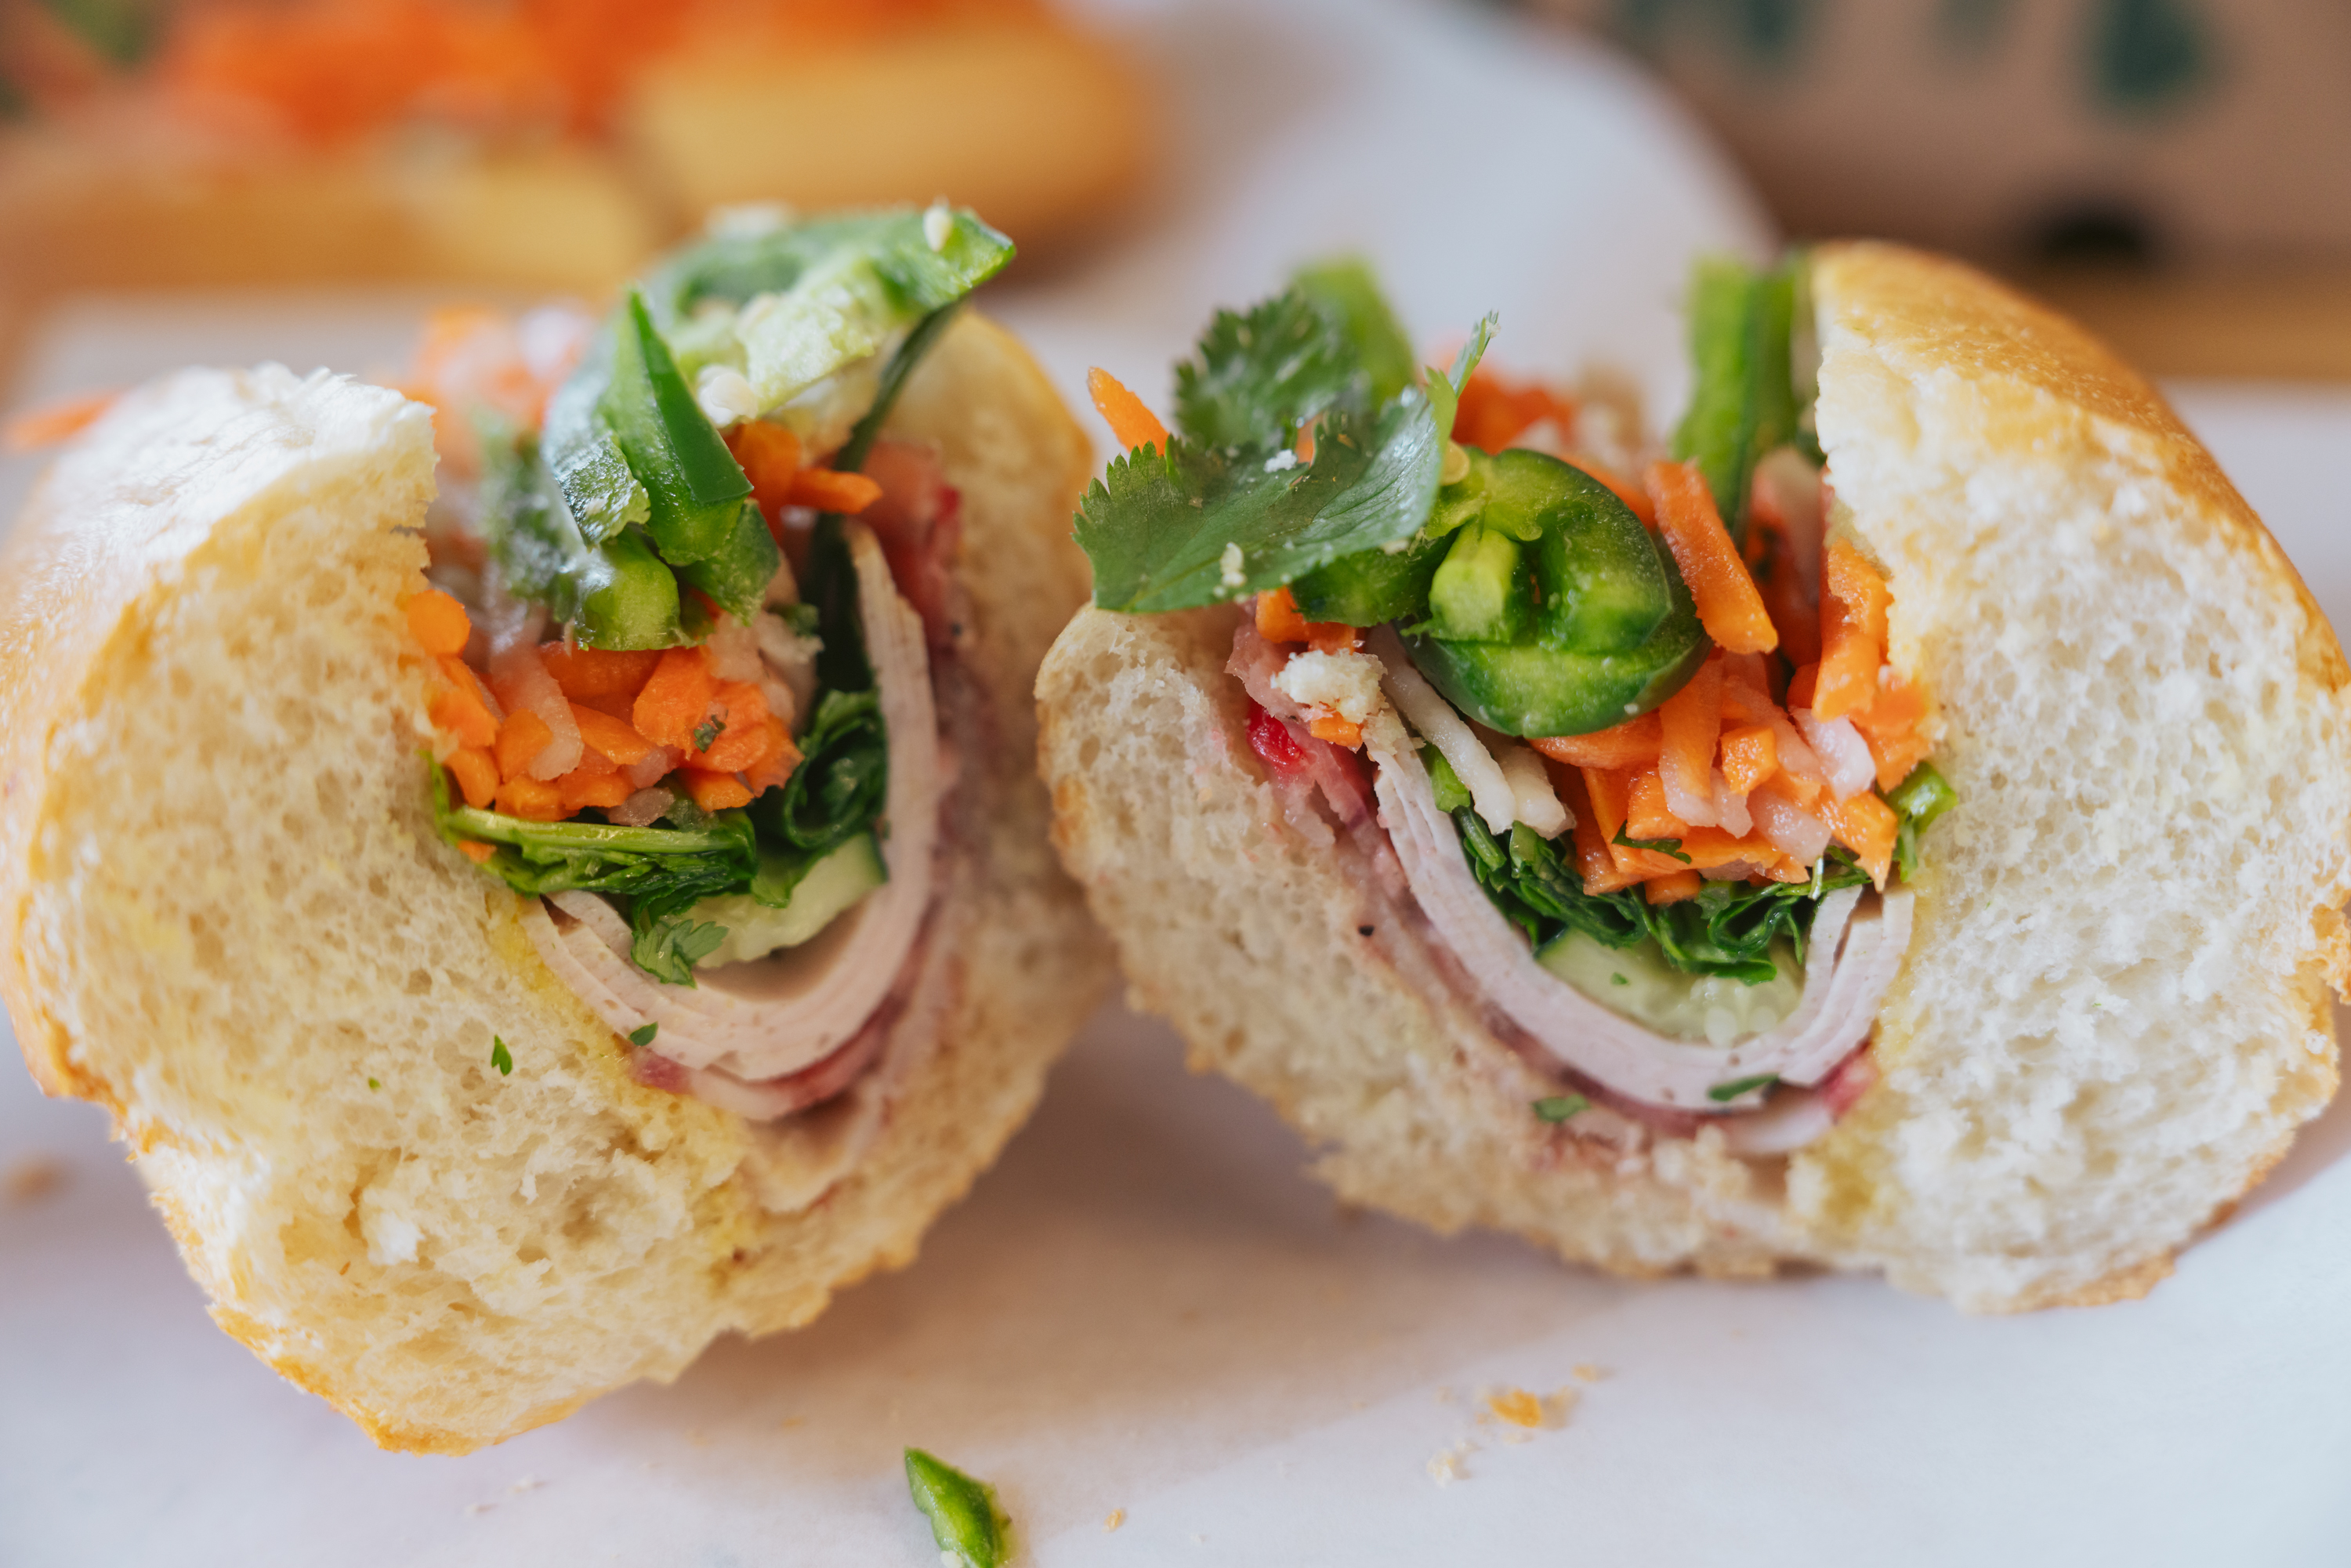 a banh mi sandwich made with turkey, carrots, cilantro and jalapenos on a roll, cut in half